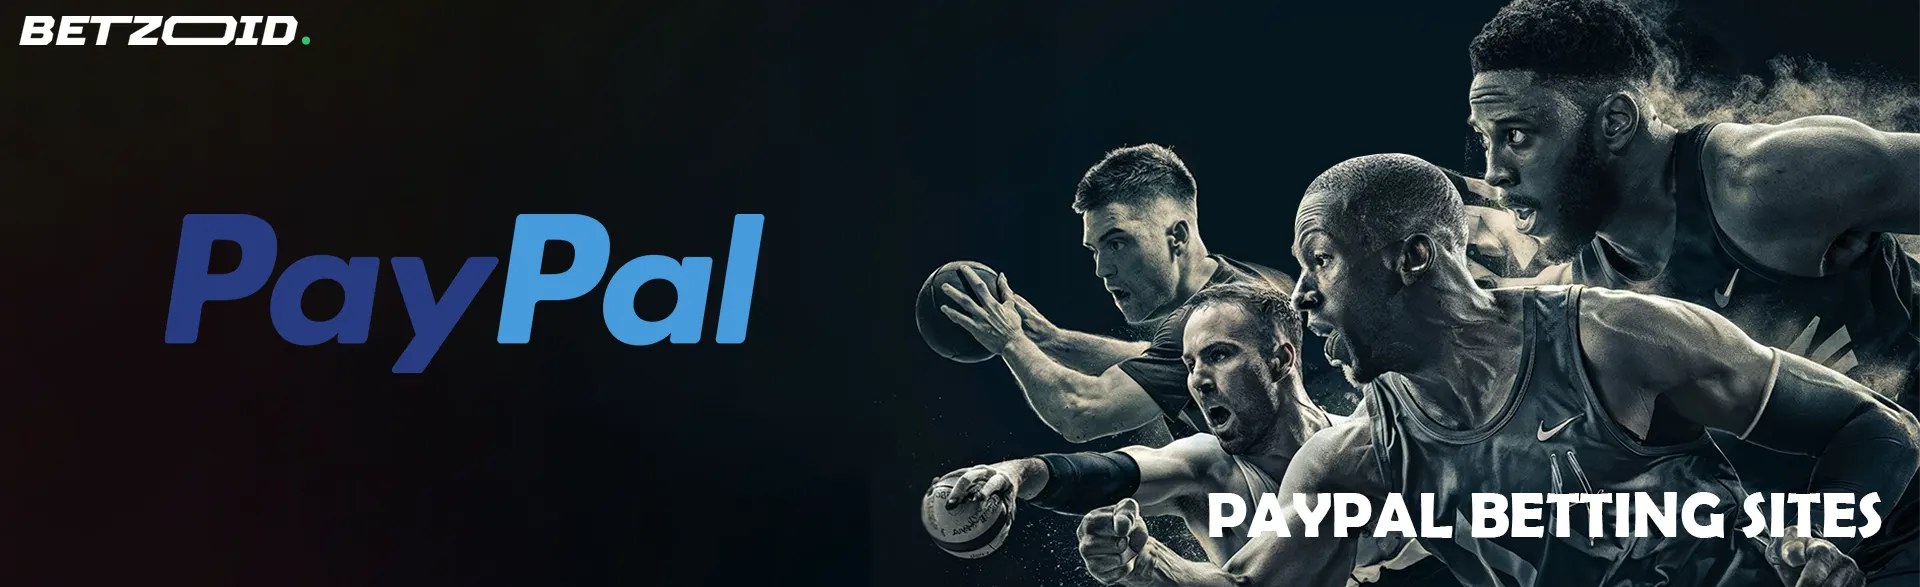 PayPal logo and athletes in action for online sports betting sites that accept PayPal.